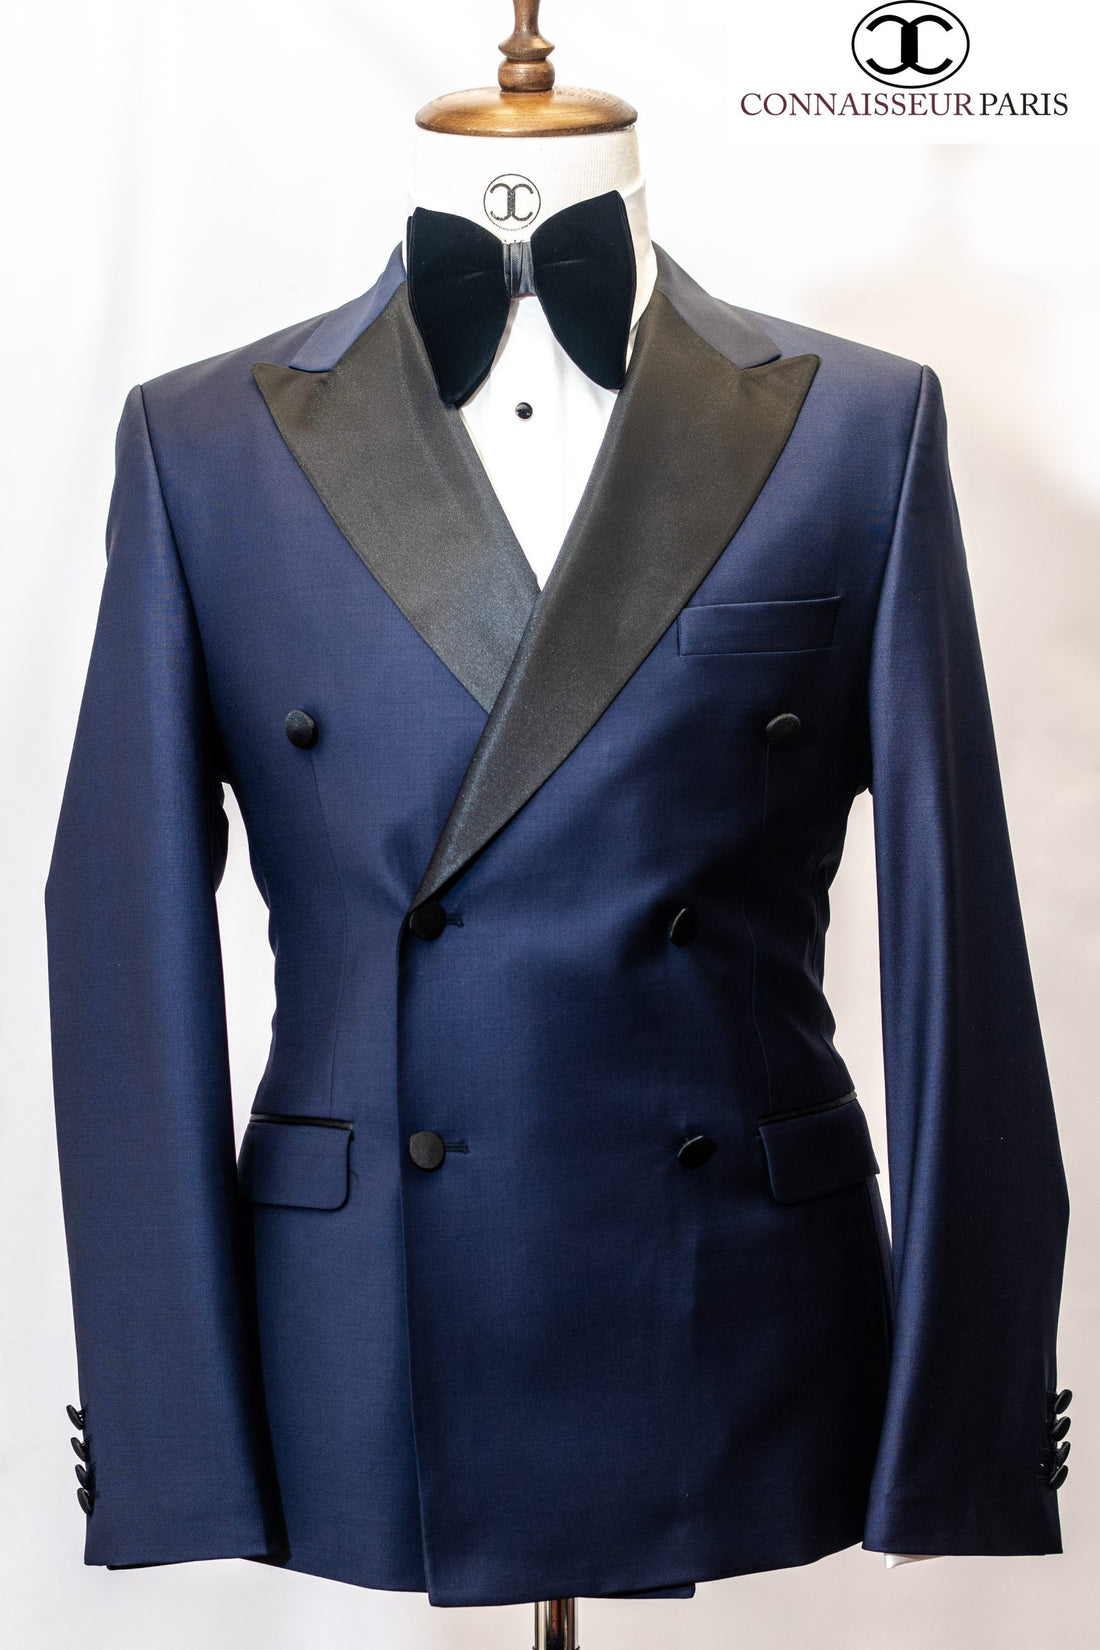 Connaisseur - Navy Blue Double Breasted slim fit tuxedo with peaked lapel